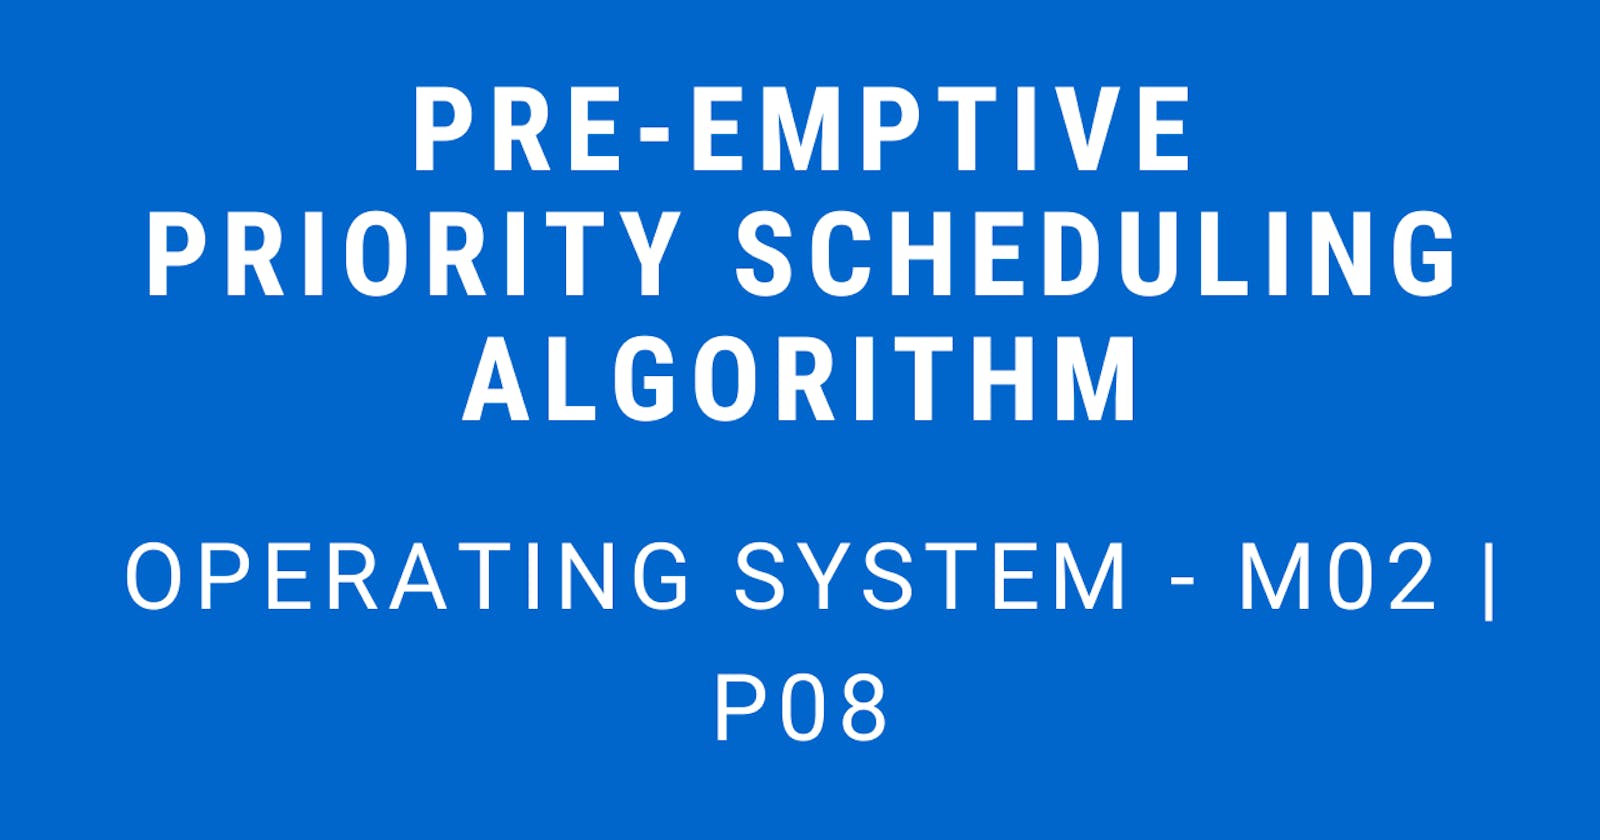 Pre-emptive Priority Scheduling Algorithm | Operating System - M02 P08